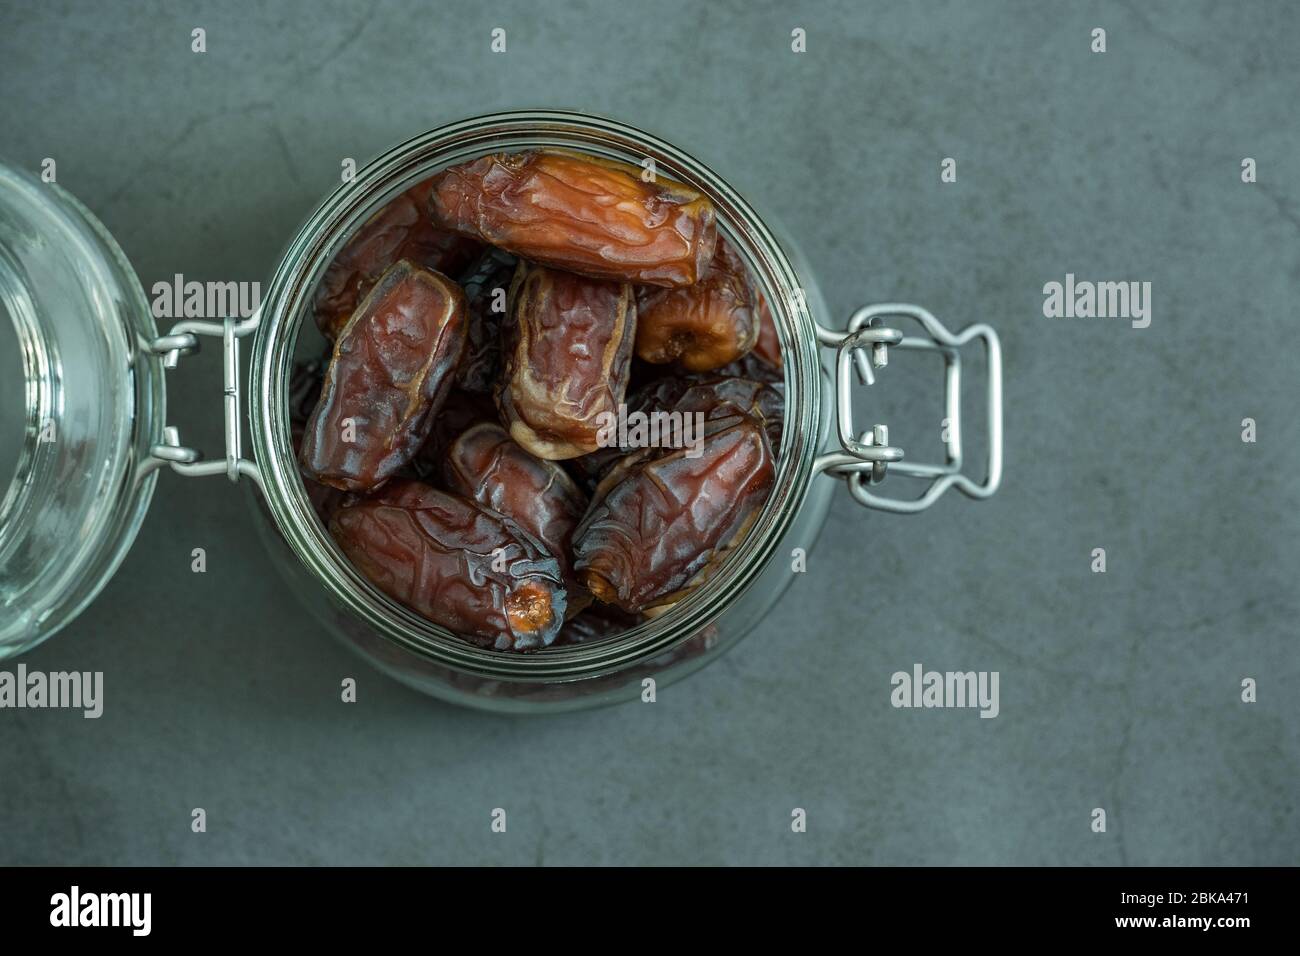 Raw date fruit ready to eat in glass jar on concrete background. Traditional, delicious and healthy ramadan food. Flat lay, top view. Stock Photo